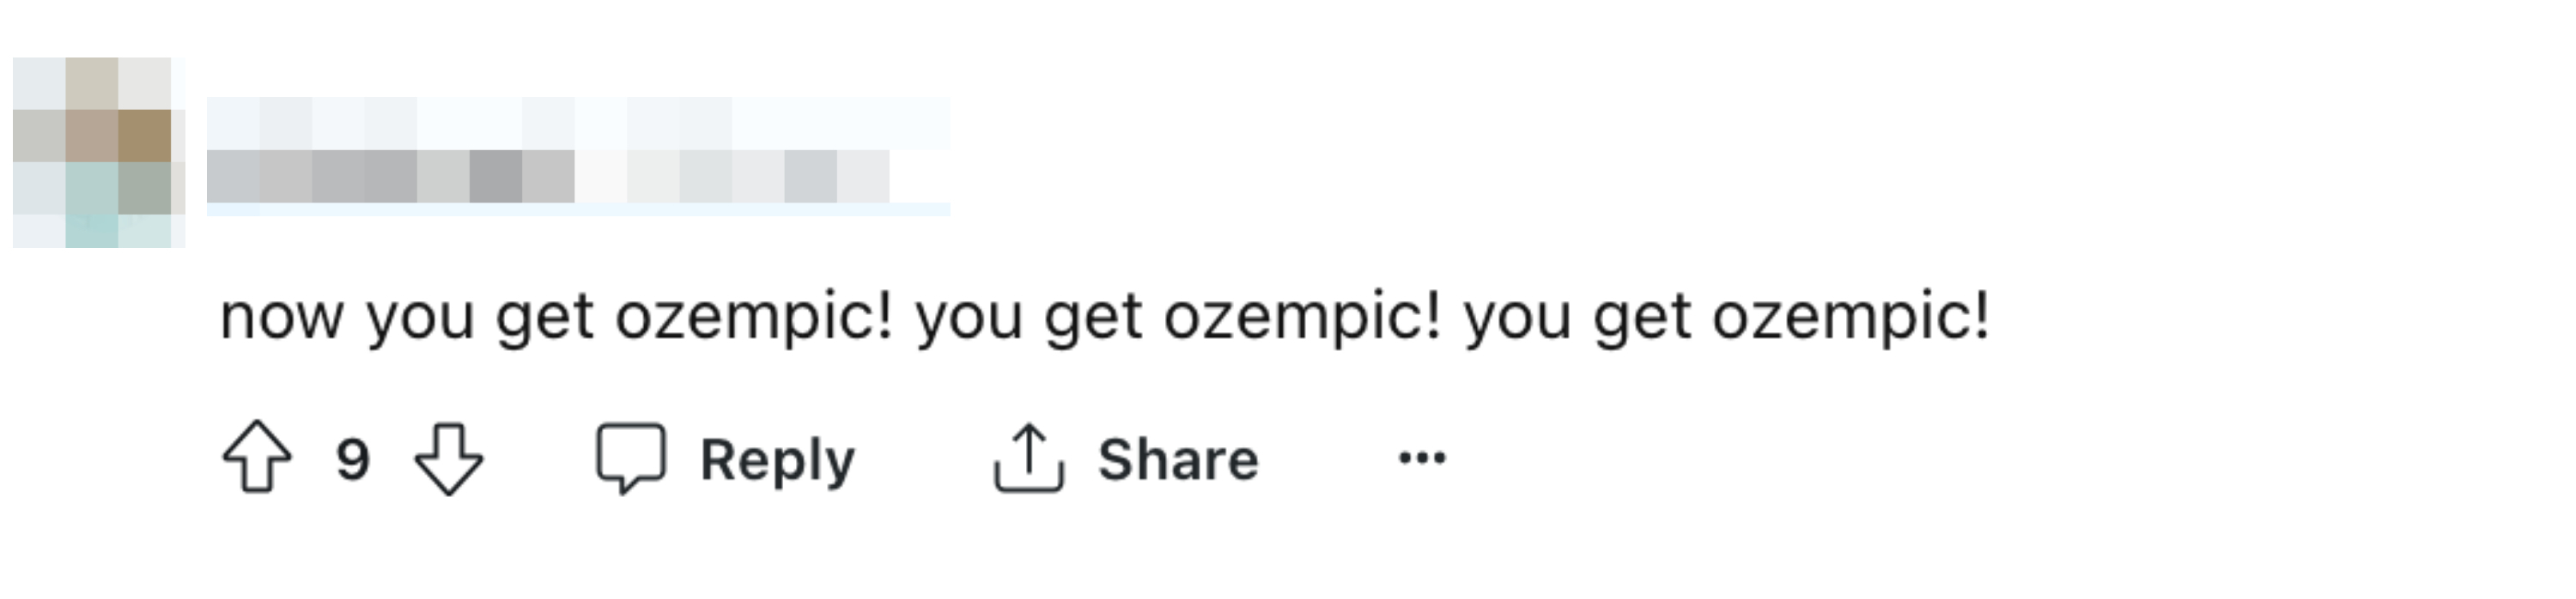 Commenter expresses excitement, parodying a giveaway, about the medication Ozempic